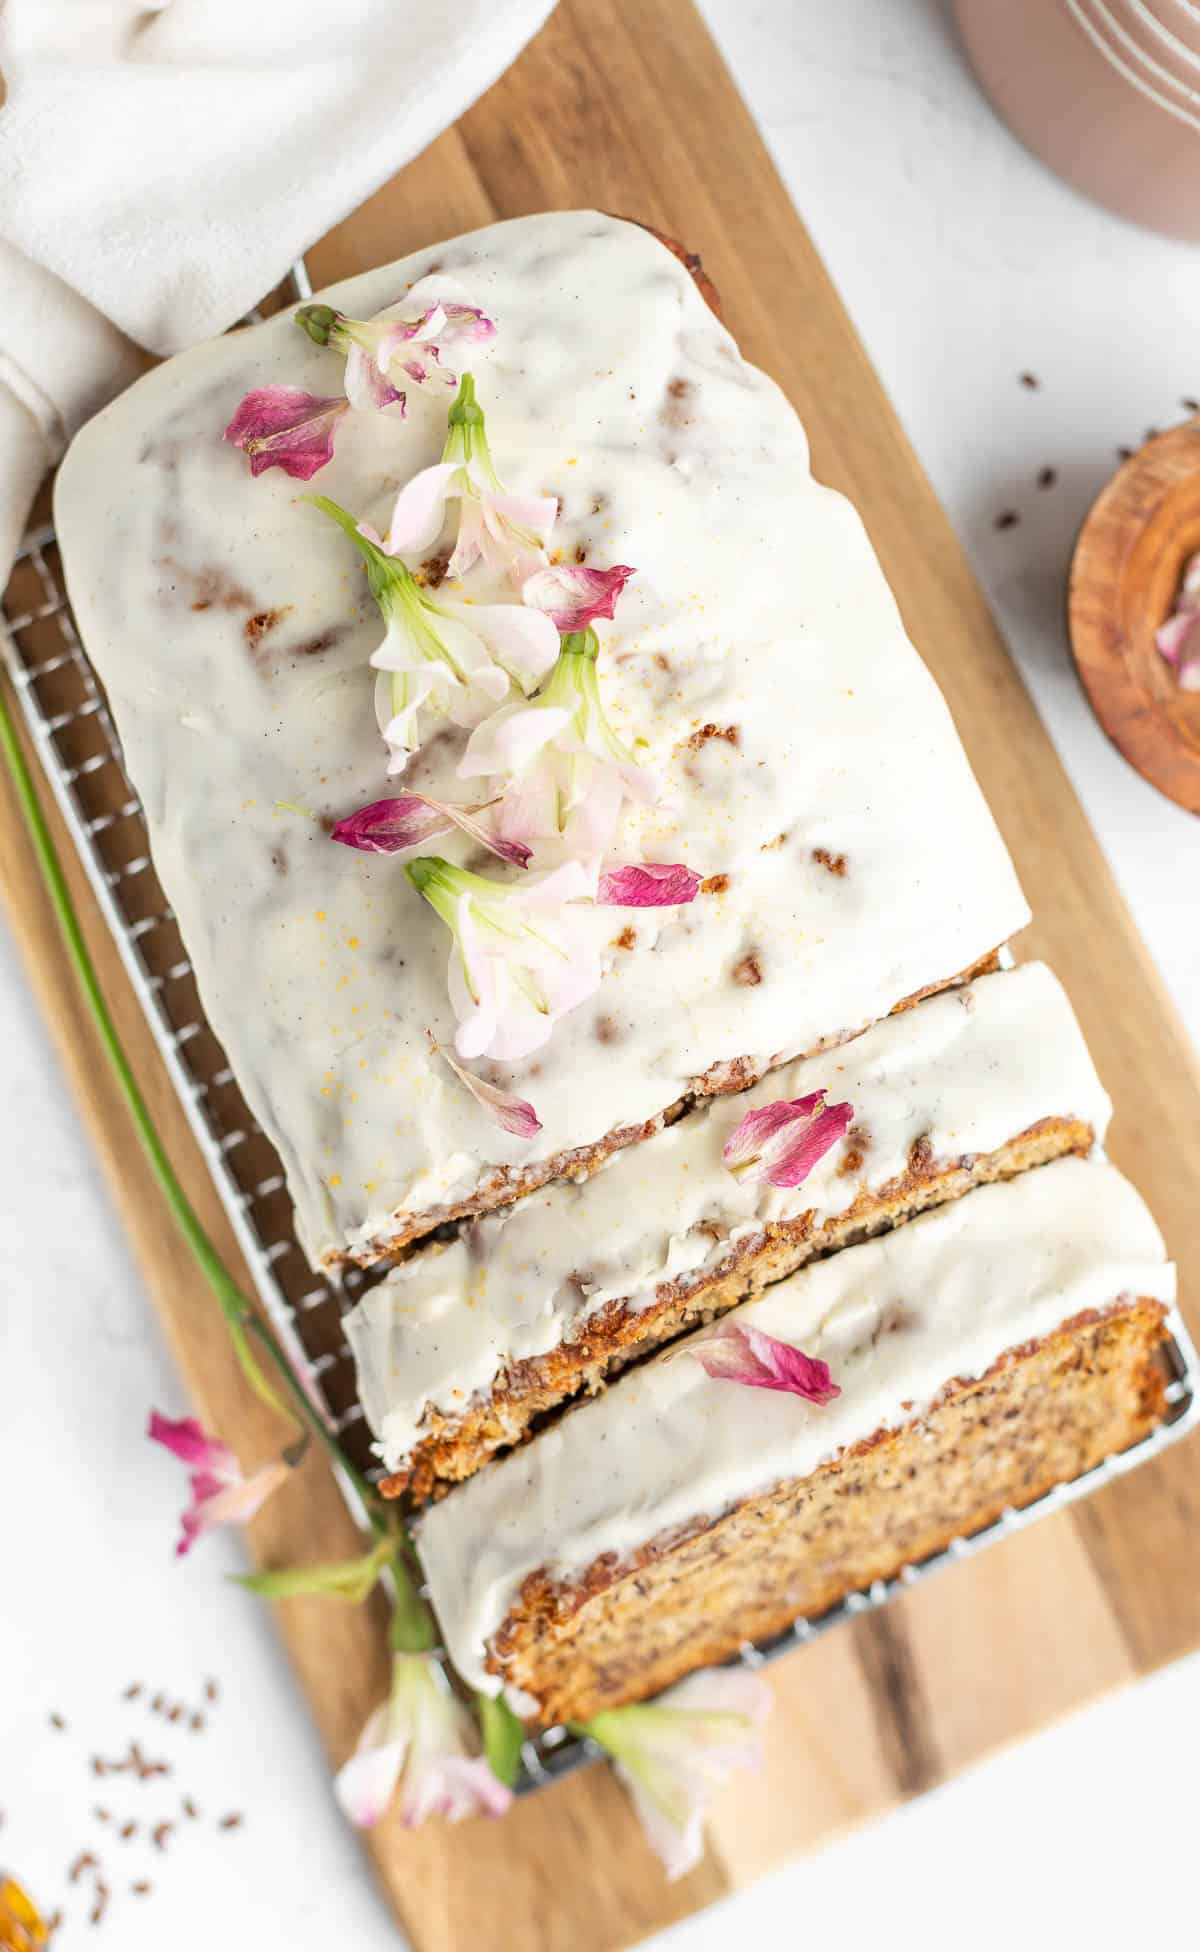 glazed eggless banana bread topped with flower petals on a wooden board.